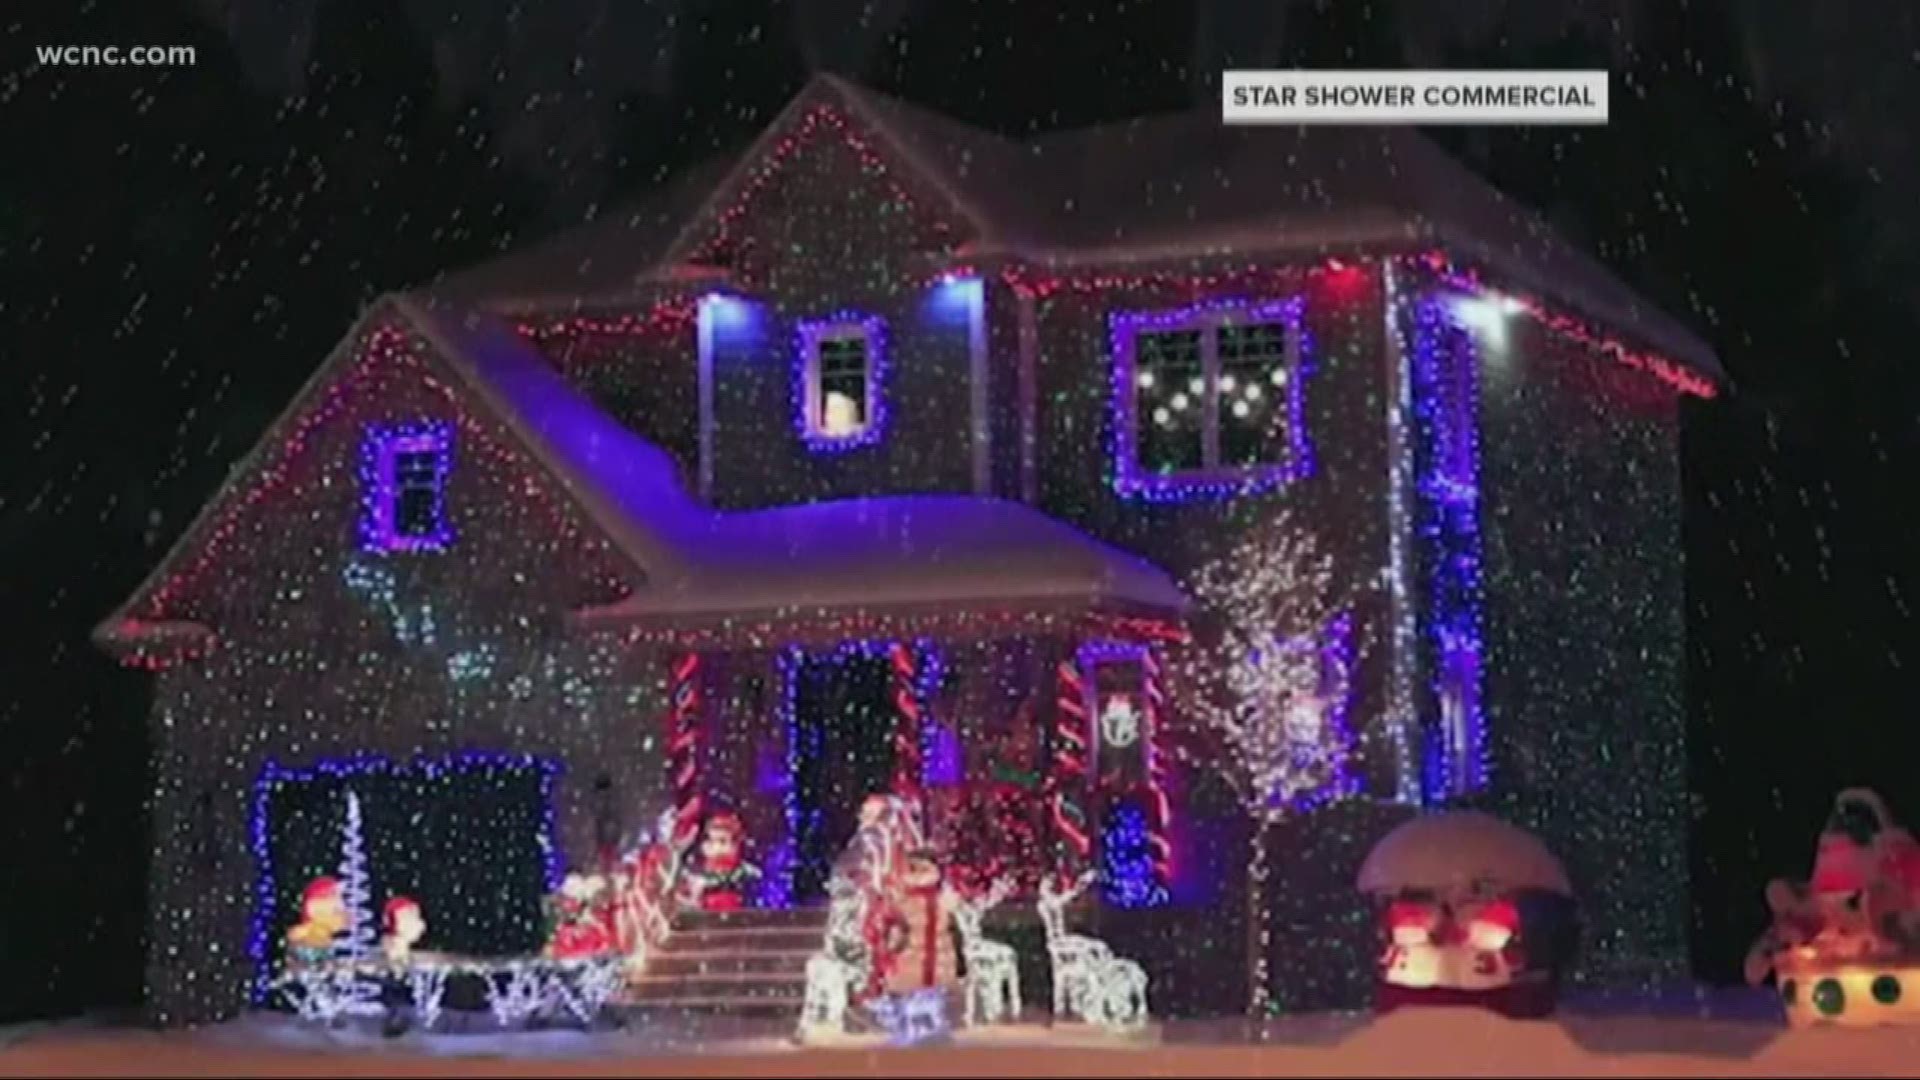 The FAA is asking homeowners to make sure their decorations aren't pointed to the sky or pull the plug on them all together.